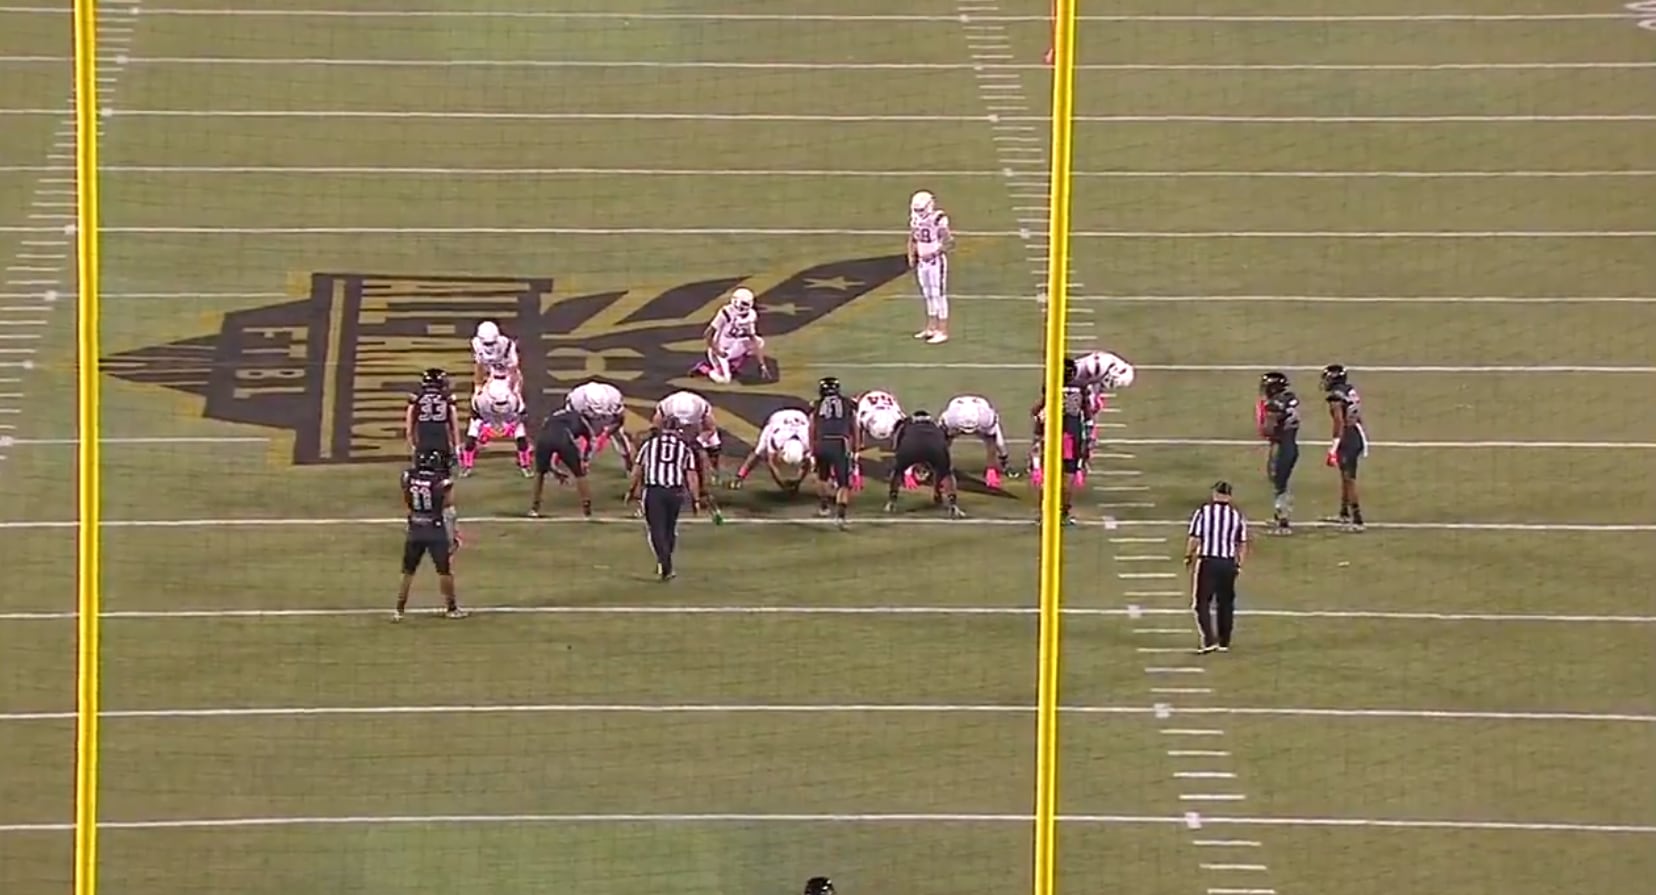 A screenshot of the ESPN2 telecast of the Under Armour All-America Game on Jan. 3, 2019